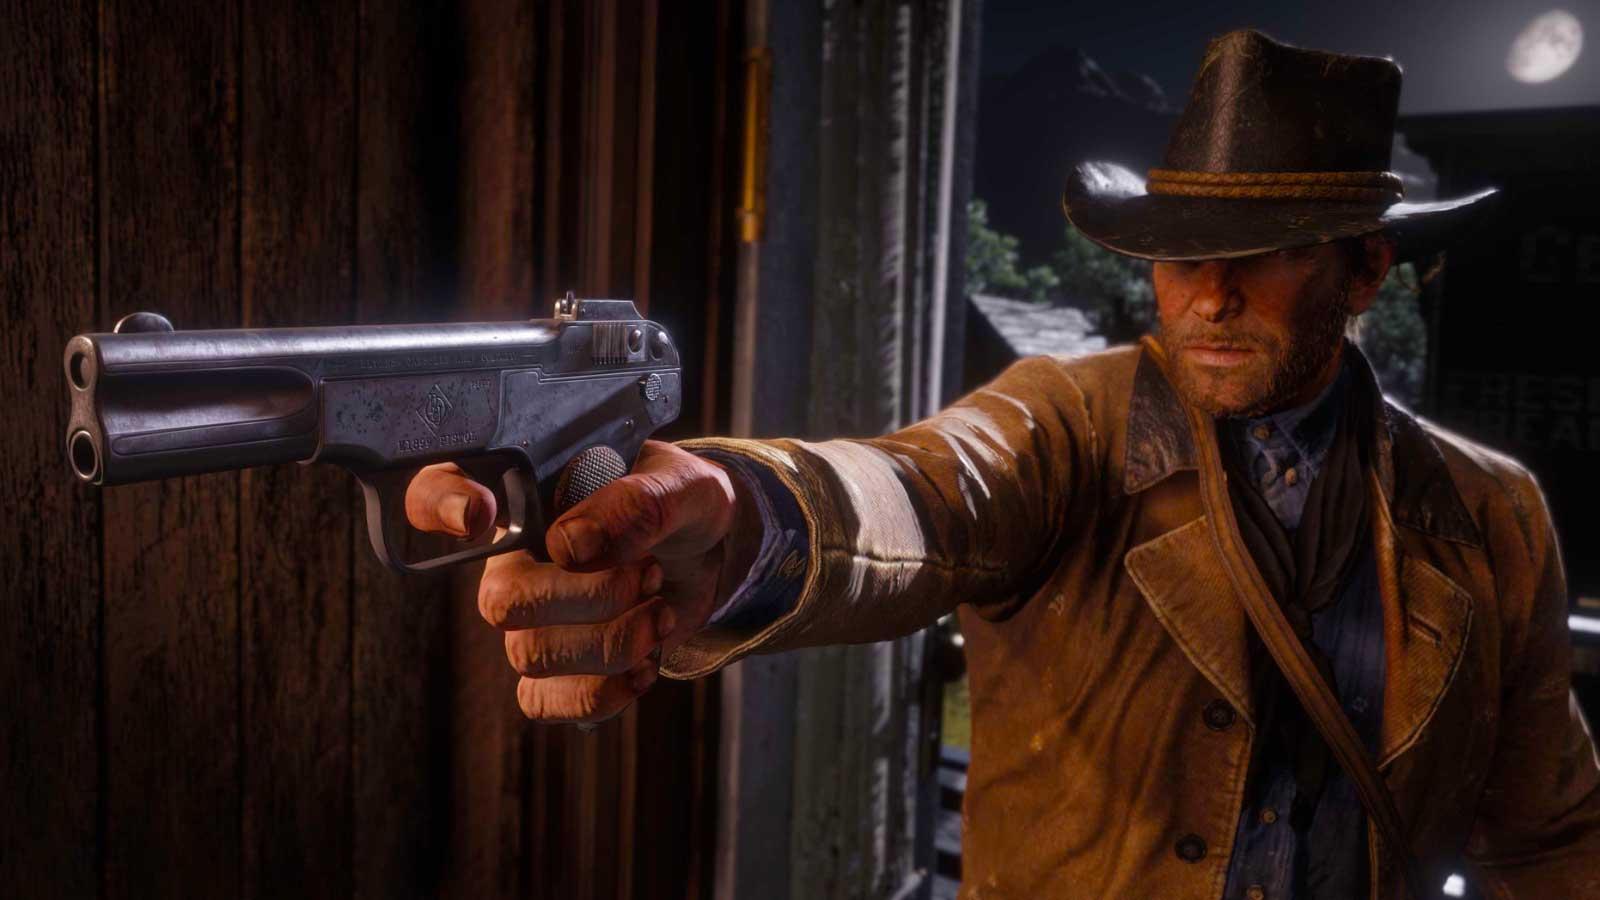 Red Dead Redemption 3 release confirmed by Strauss Zelnick